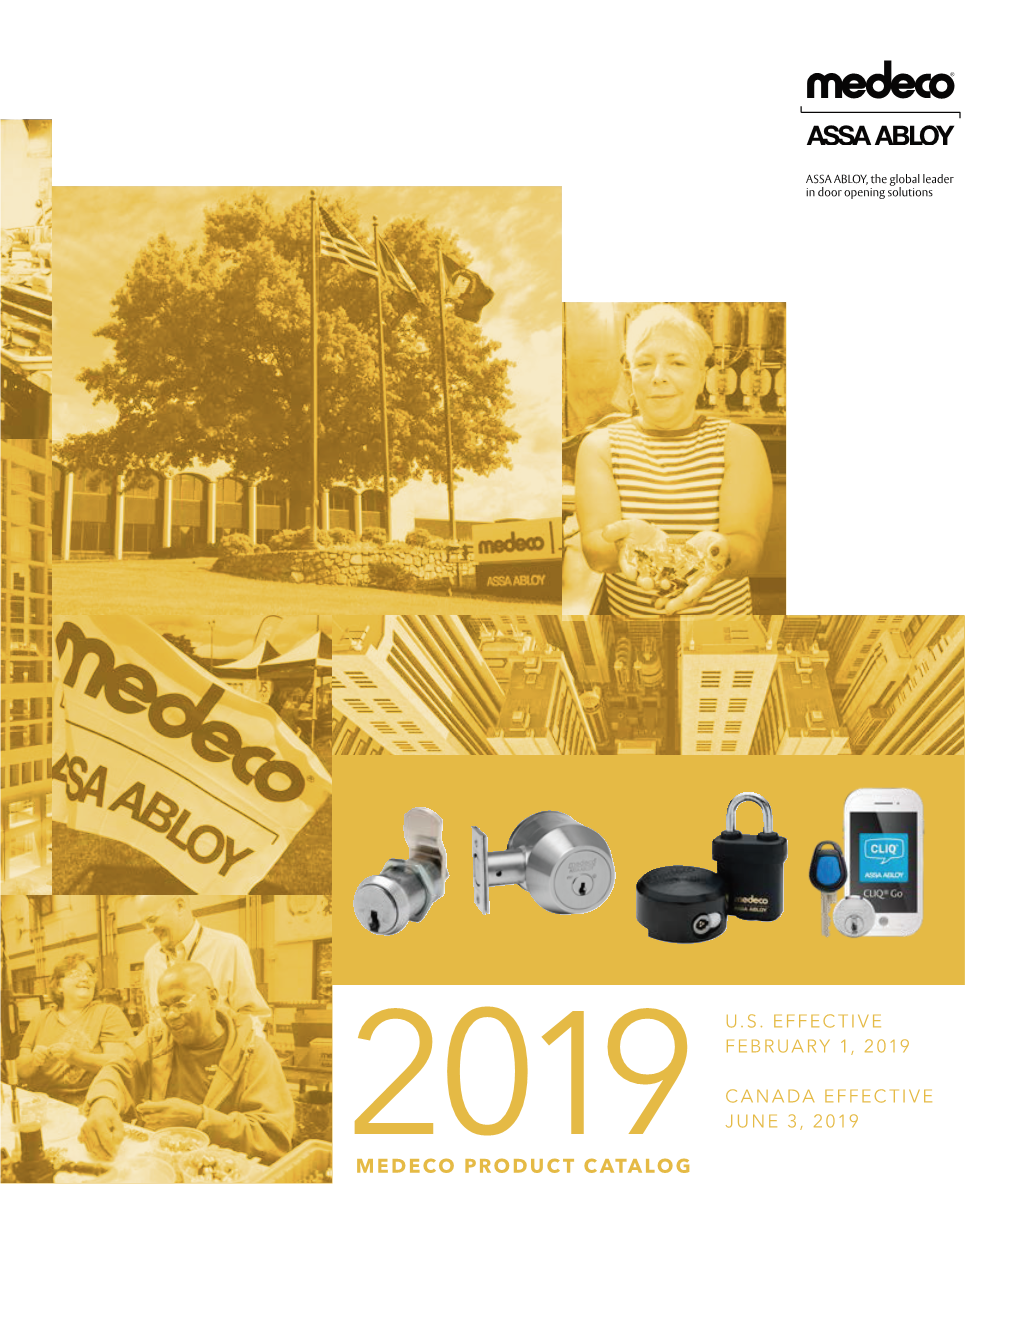 MEDECO PRODUCT CATALOG MEDECO.COM 2019 Medeco Is a Brand Associated with ASSA ABLOY High Security Group, Inc., an ASSA ABLOY Group Company